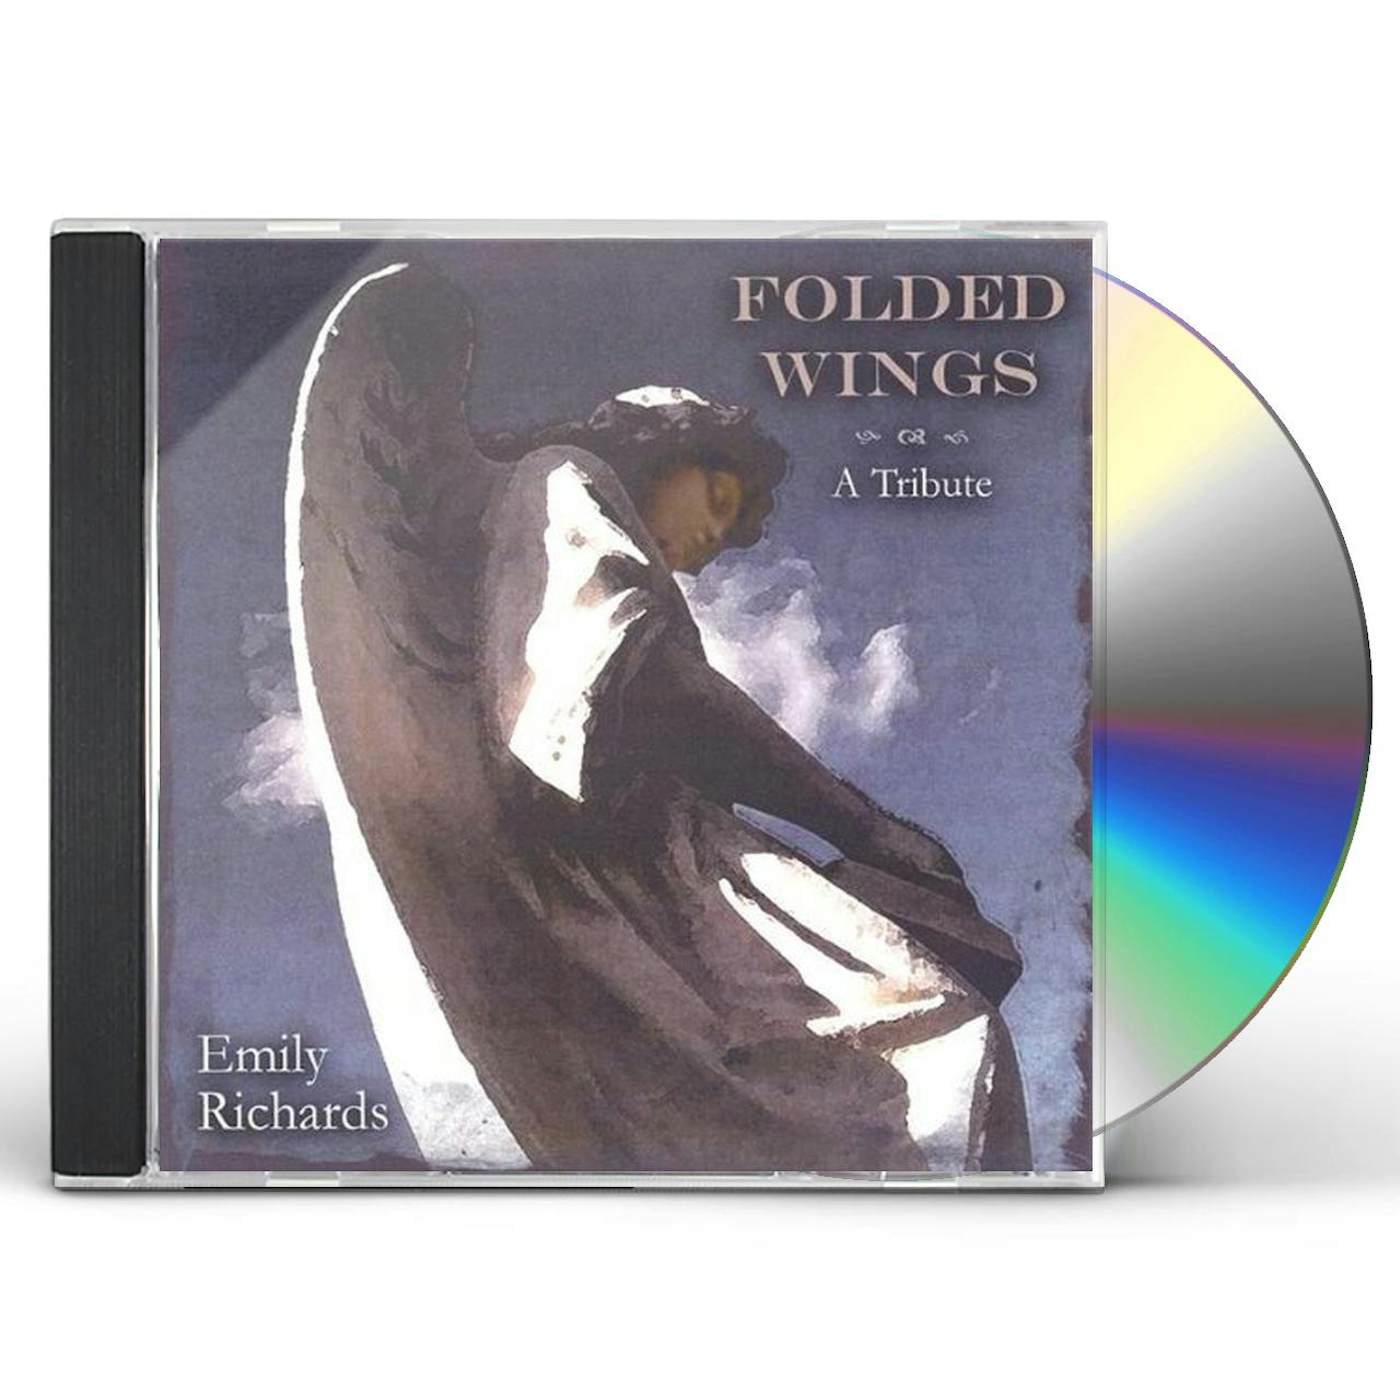 Emily Richards FOLDED WINGS-A TRIBUTE CD